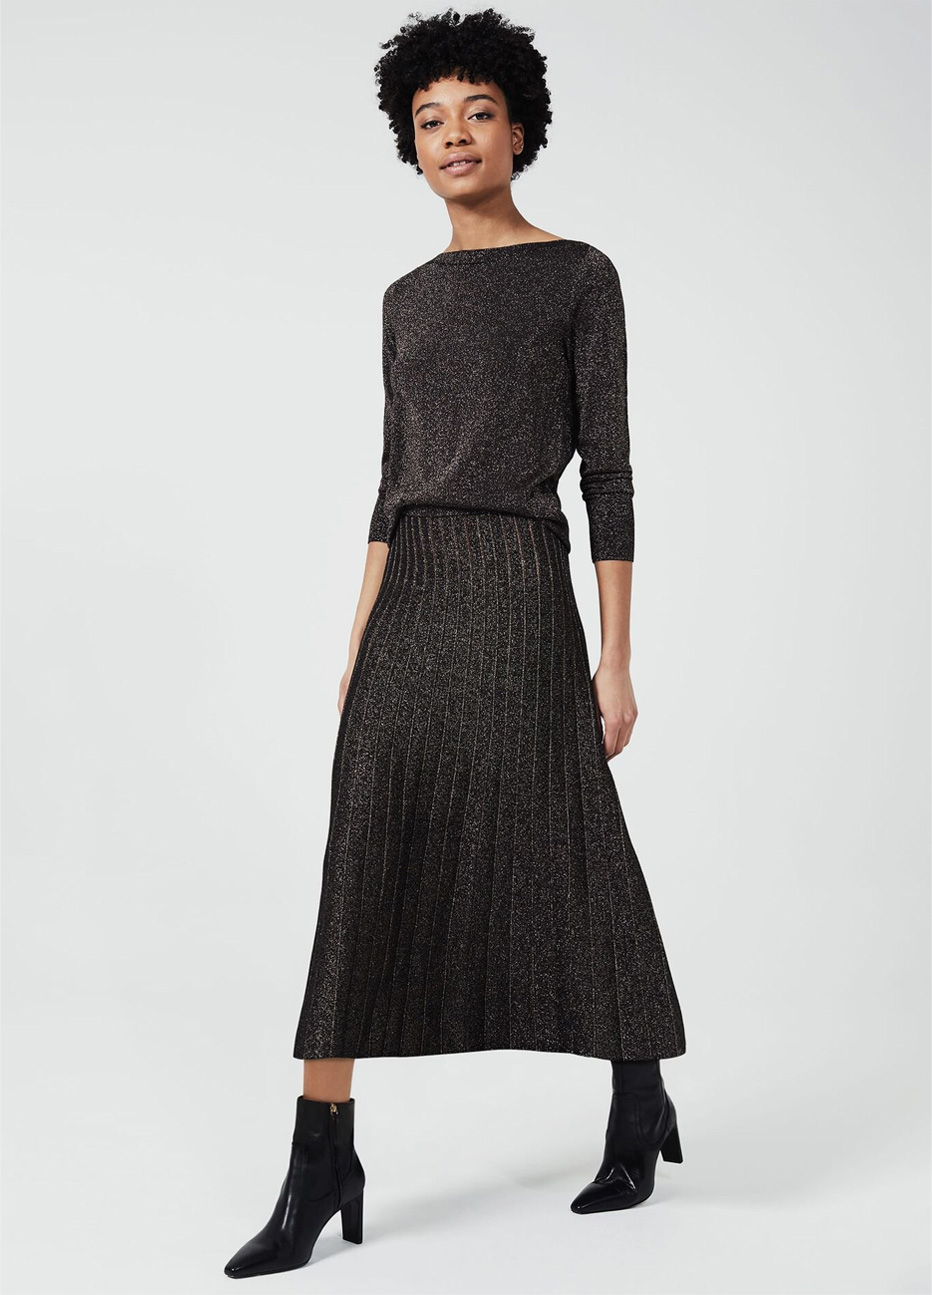 Hobbs model wearing a long sleeve sparkly knitted dress with black pointed leather ankle boots for women.